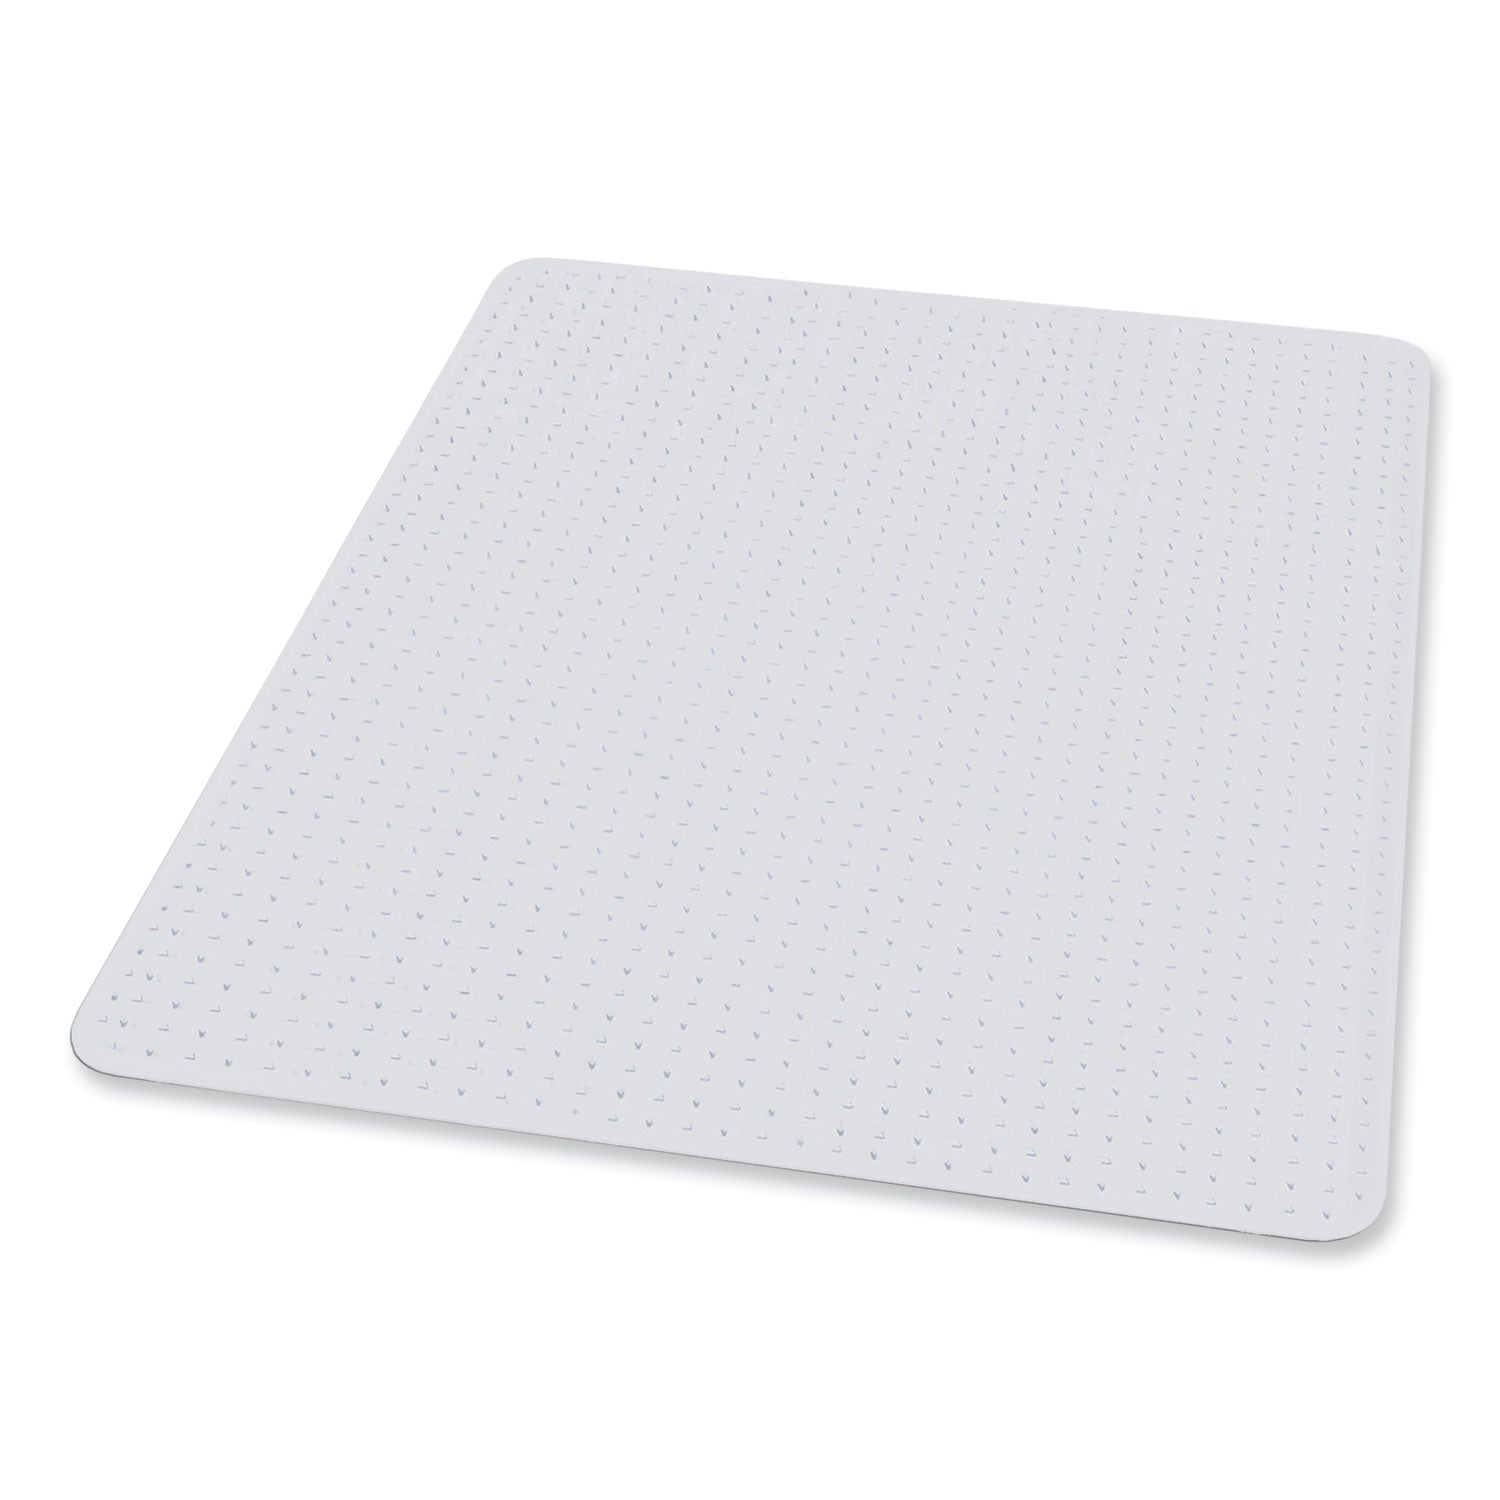 everlife-chair-mat-for-extra-high-pile-carpet-36-x-48-clear-ships-in-4-6-business-days_esr124081 - 1